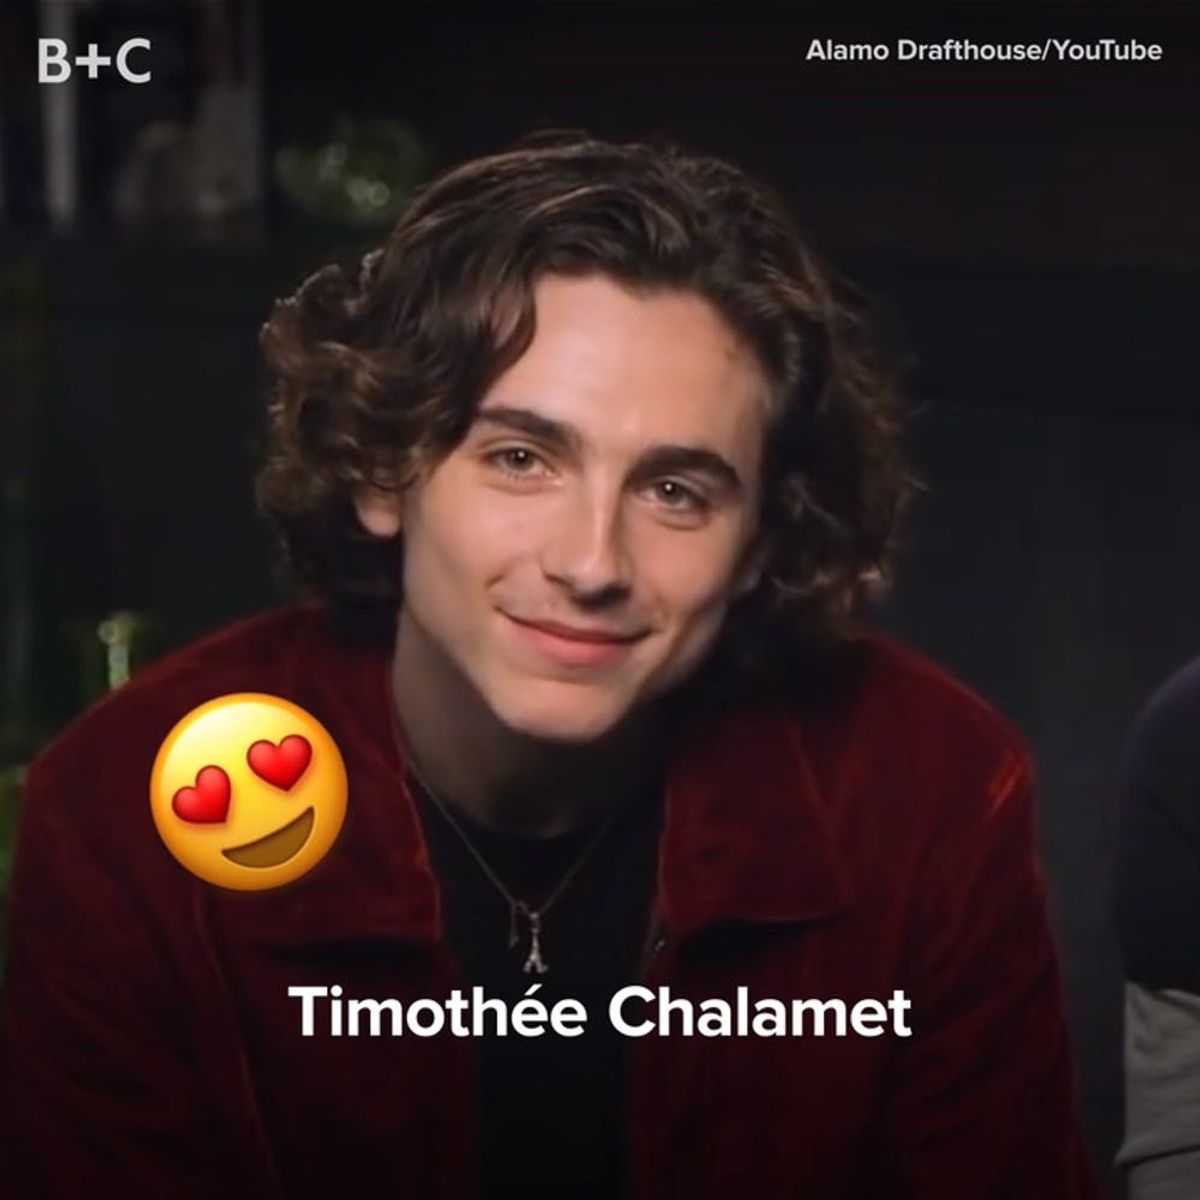 Timothée Chalamet Is Your Next Hollywood Crush